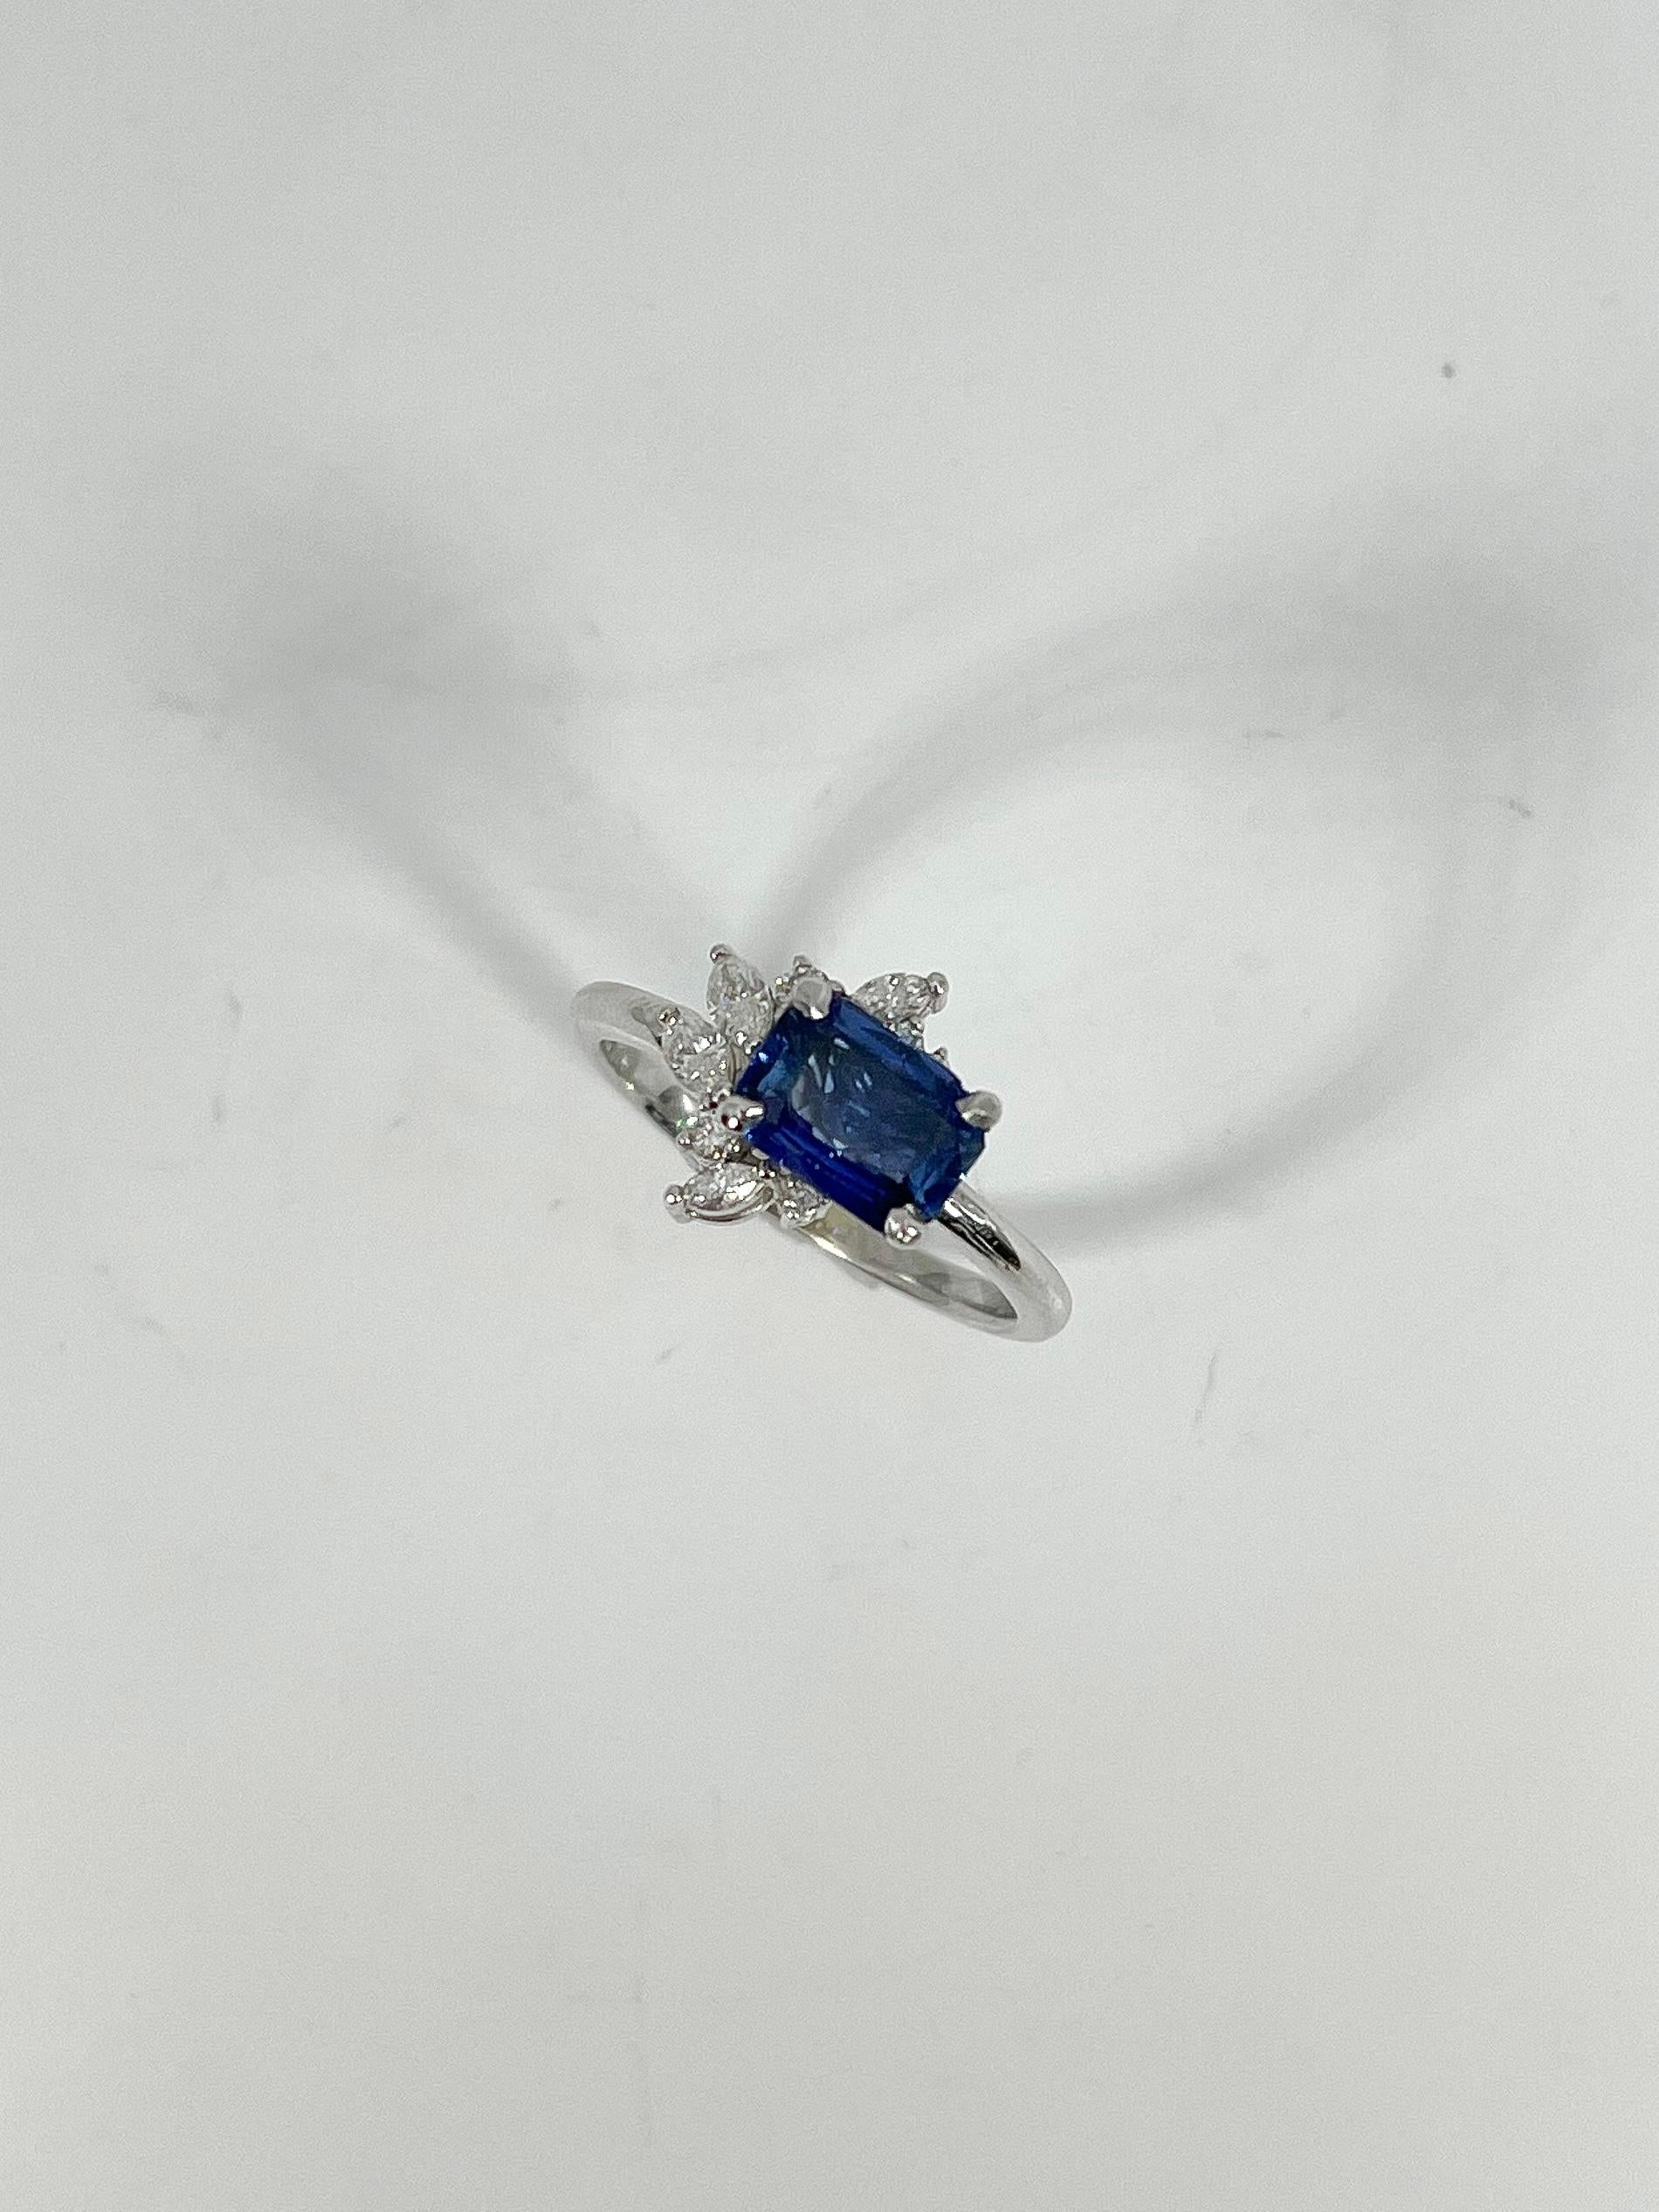 14k white gold 1.21 Ct sapphire and diamond fashion ring. Center stone is a radiant cut sapphire going east to west along with marquise and round diamonds in a design around the sapphire. The ring is a size 6 1/2 and has a weight of 3.14 grams.